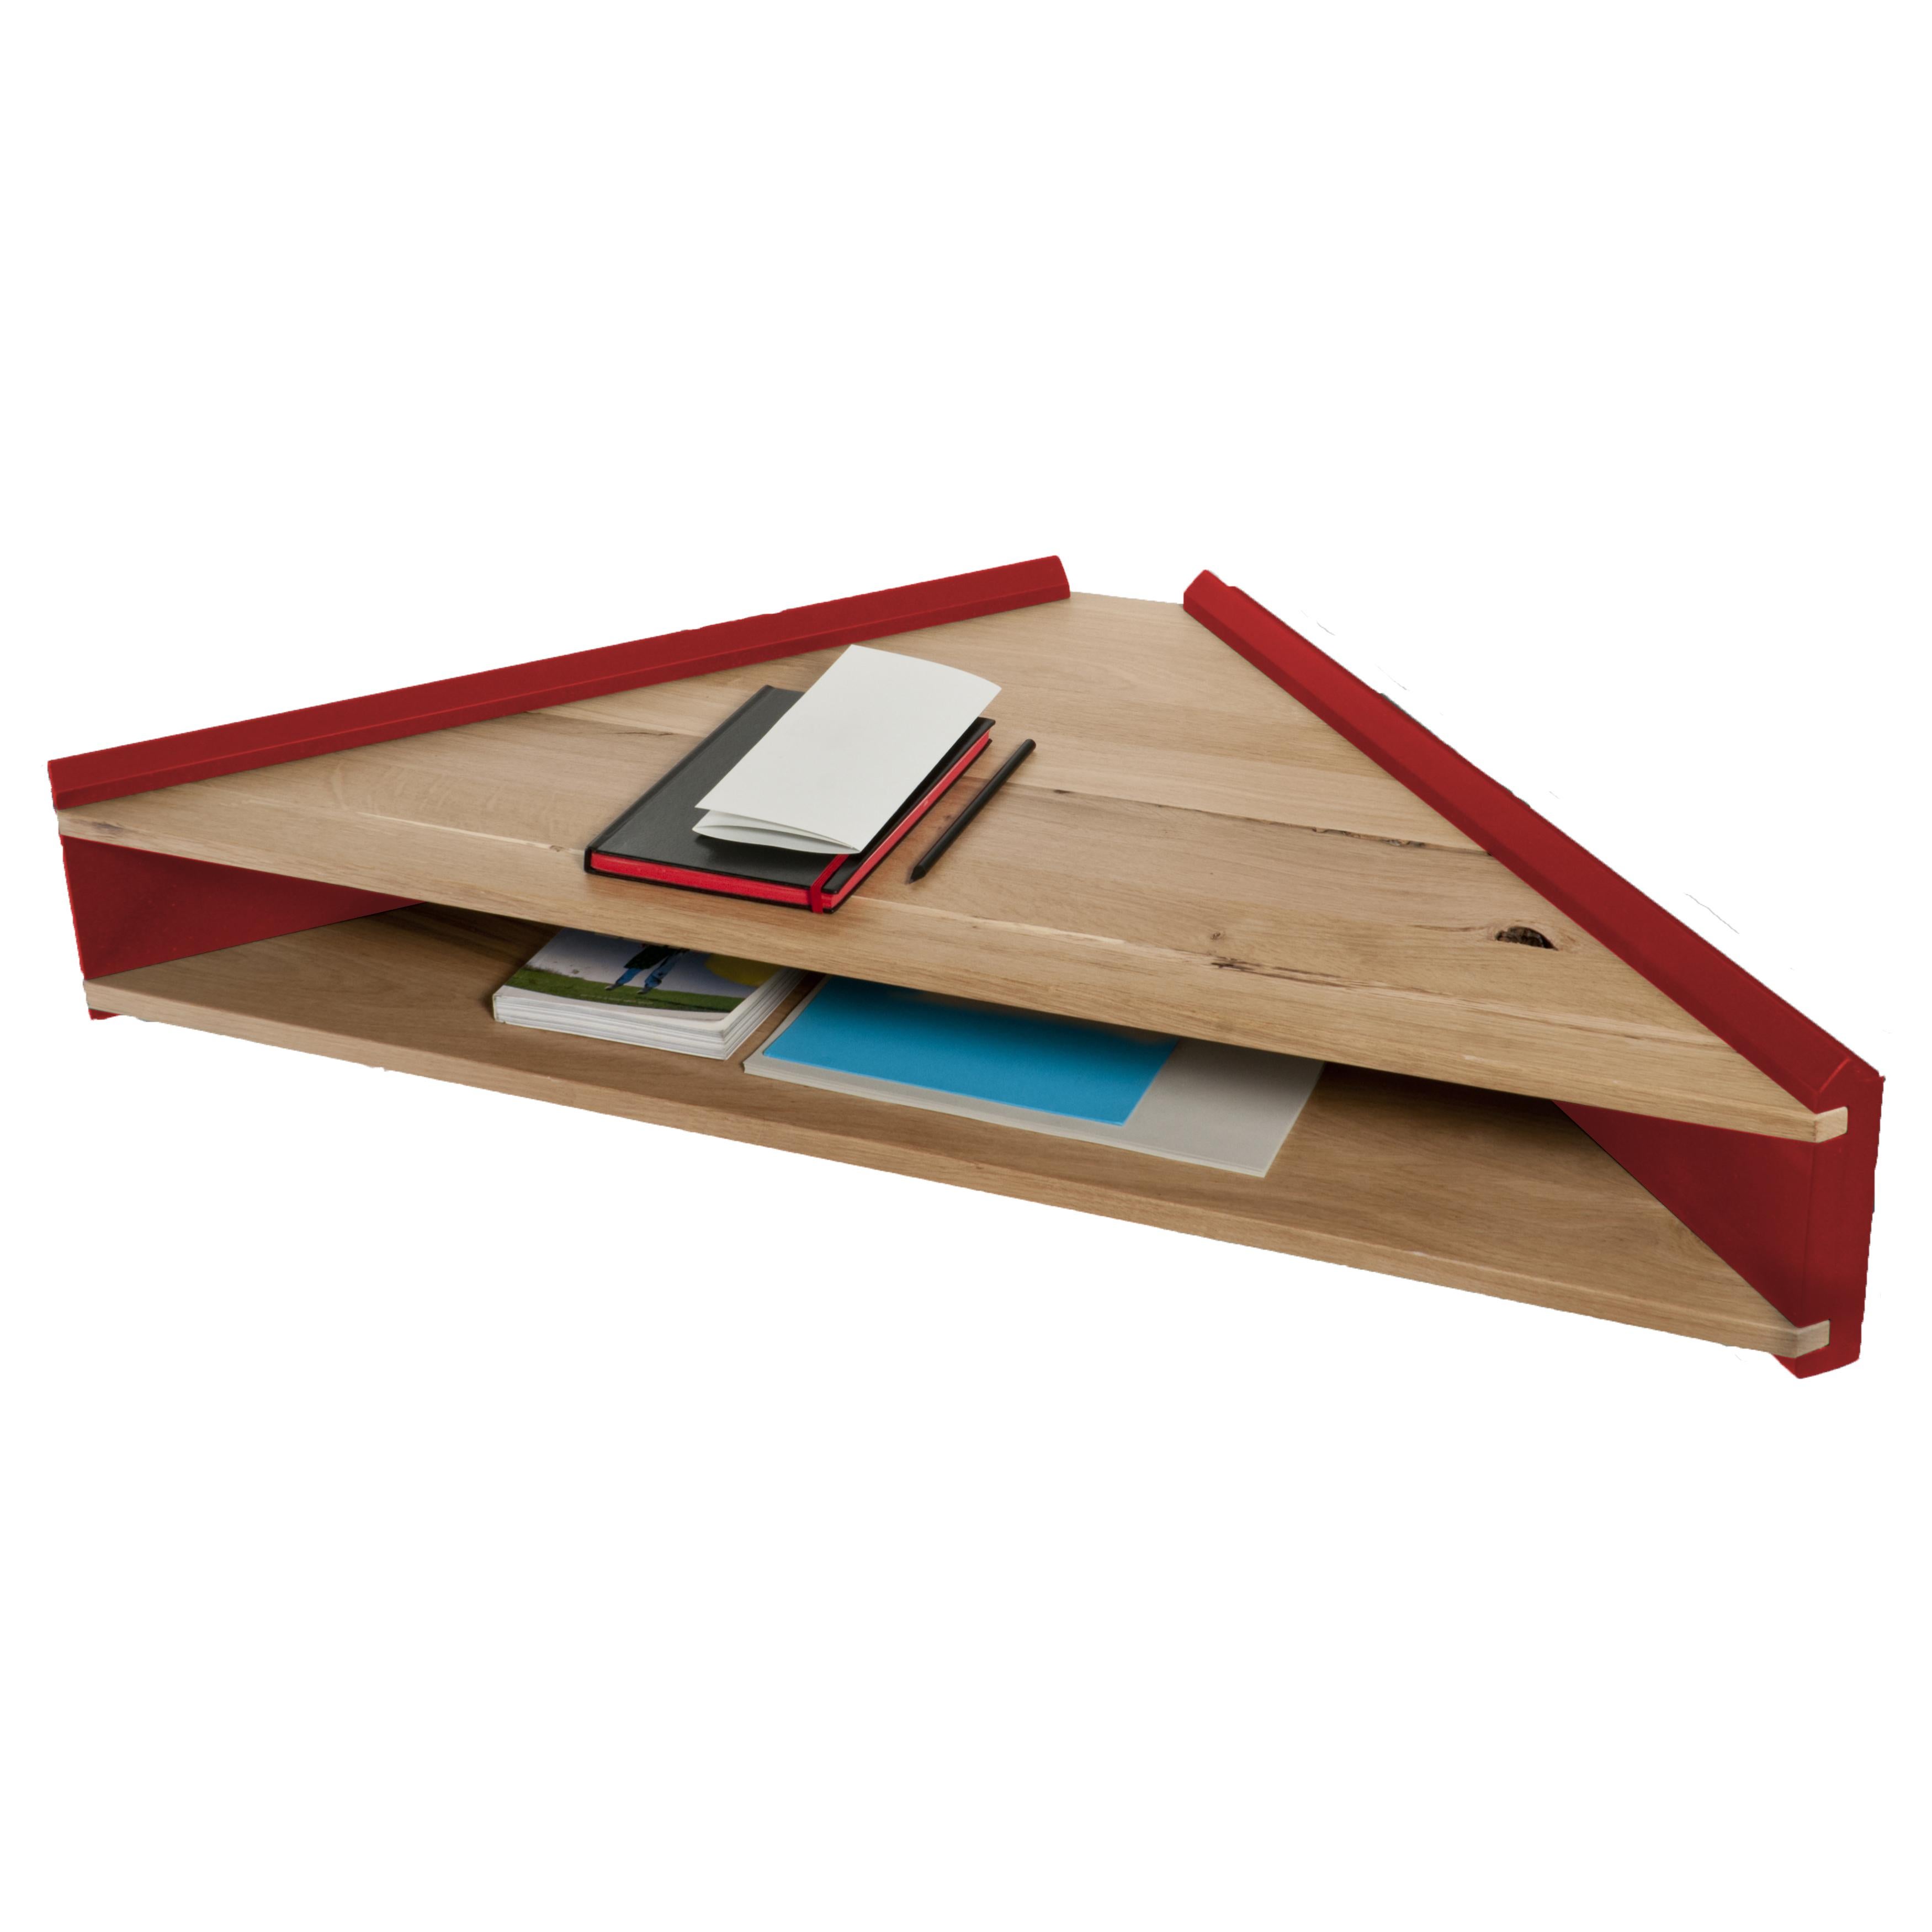 Red Briccola-ge Shelf by Colé Italia with Miki Astori
Dimensions: H.25; D.47 W.100
Materials: wall angular hanged writing desk; wall lacquered supports in wood pulp. 2 Solid oak shelves with antique style wood inserts 

Also available: red,